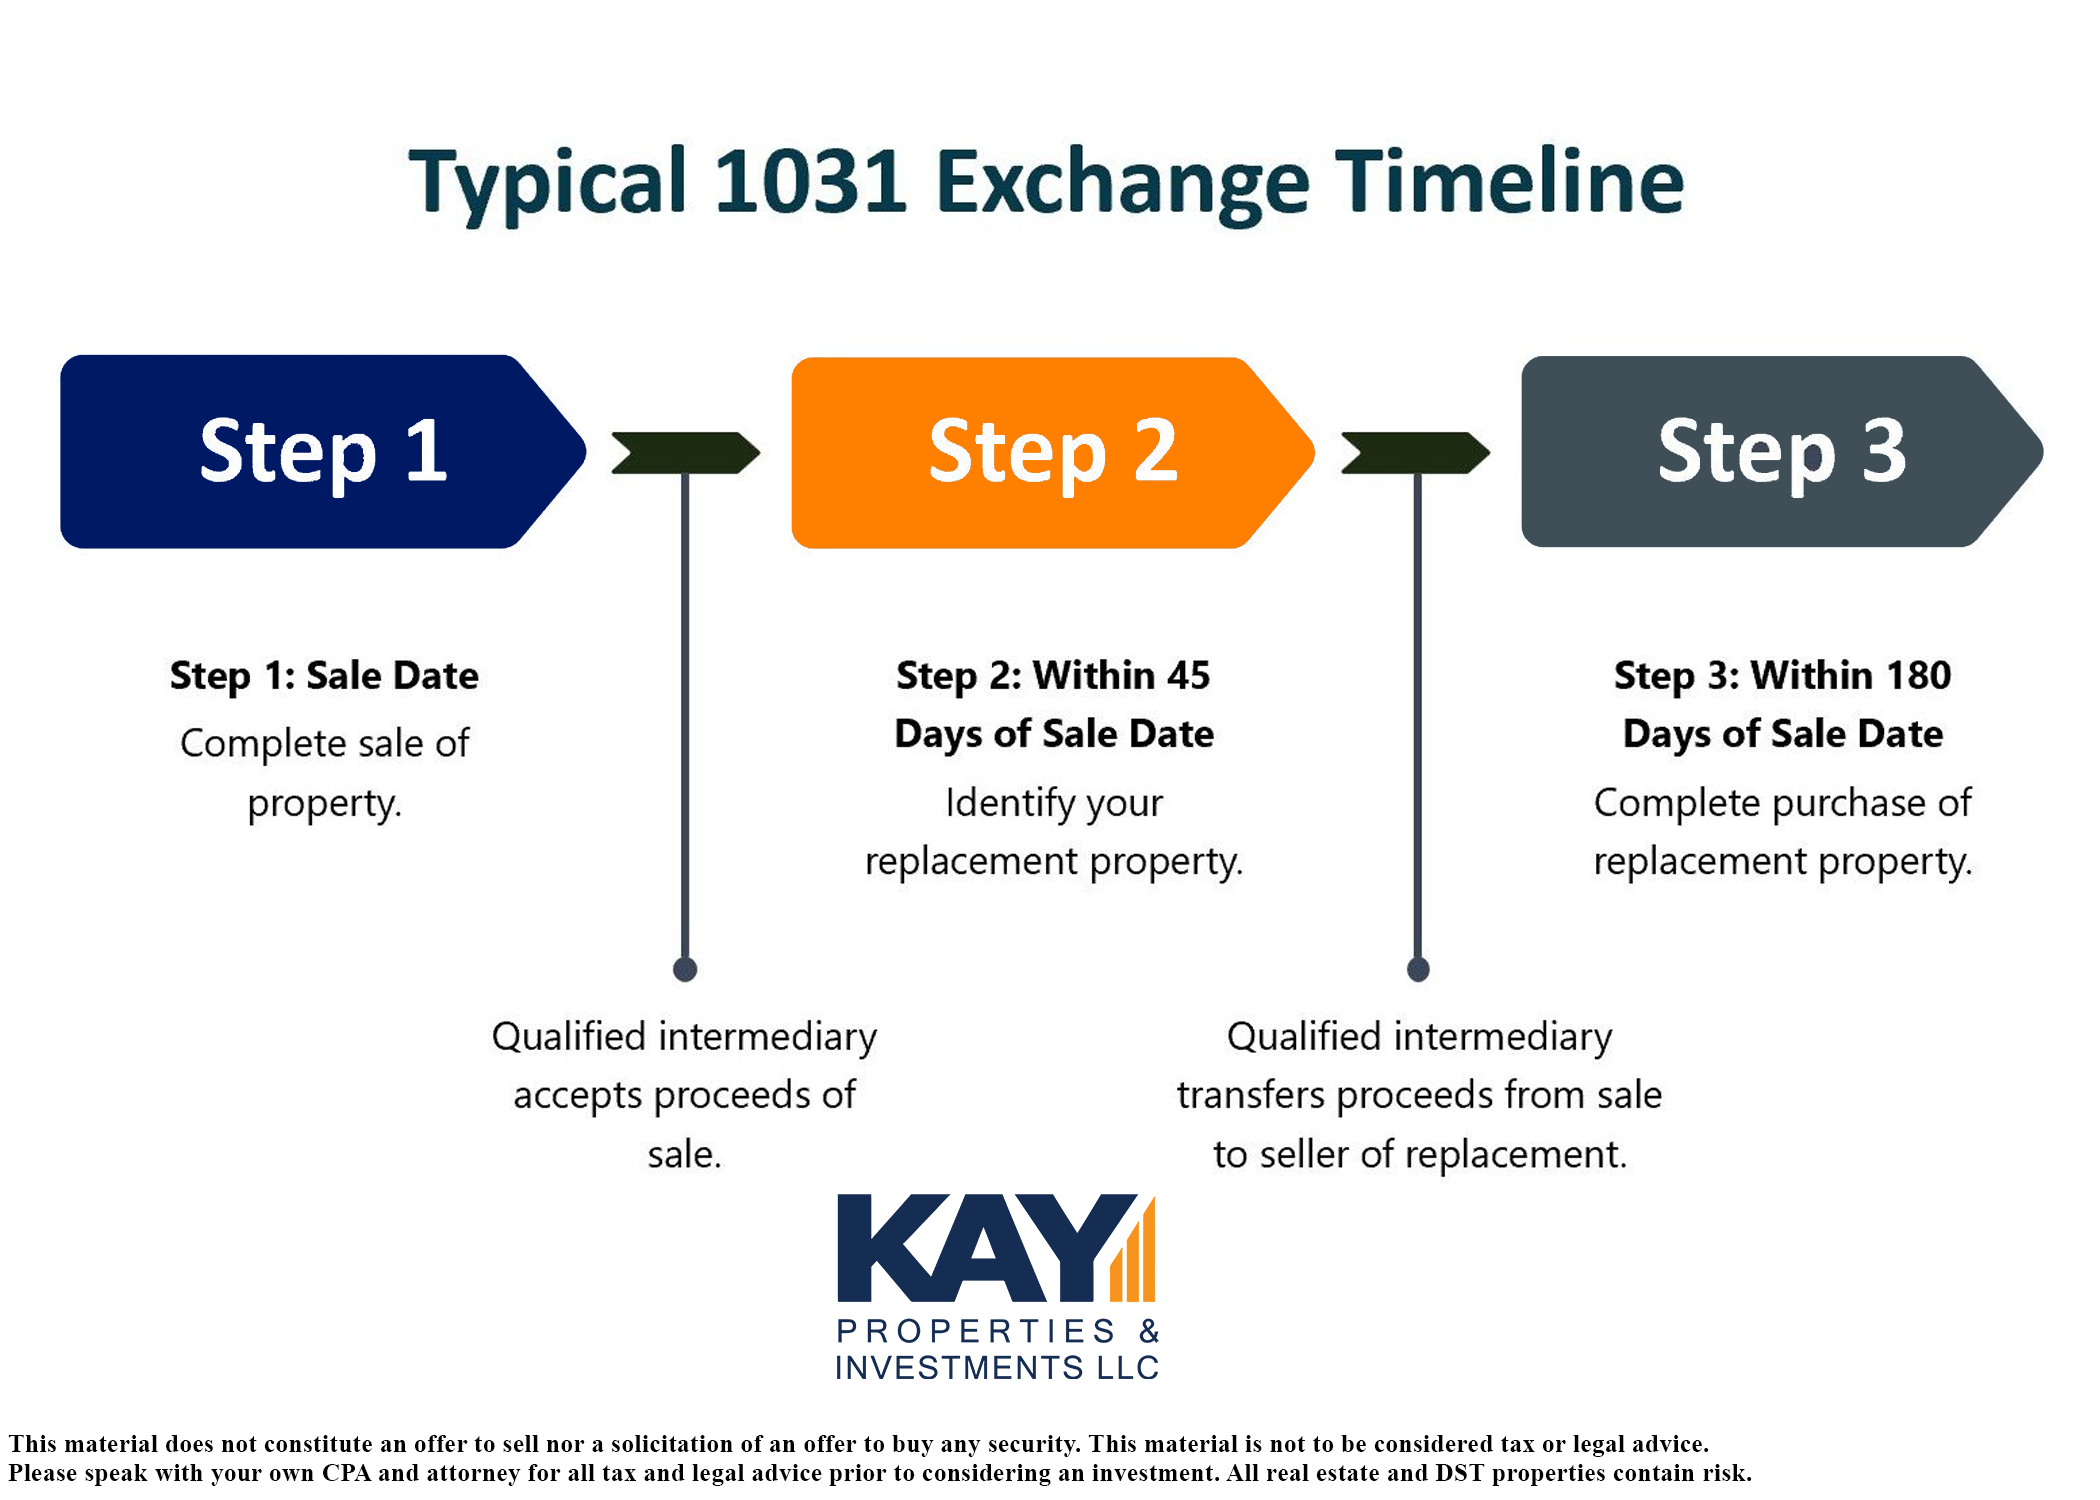 Diagram of a typical 1031 exchange timeline